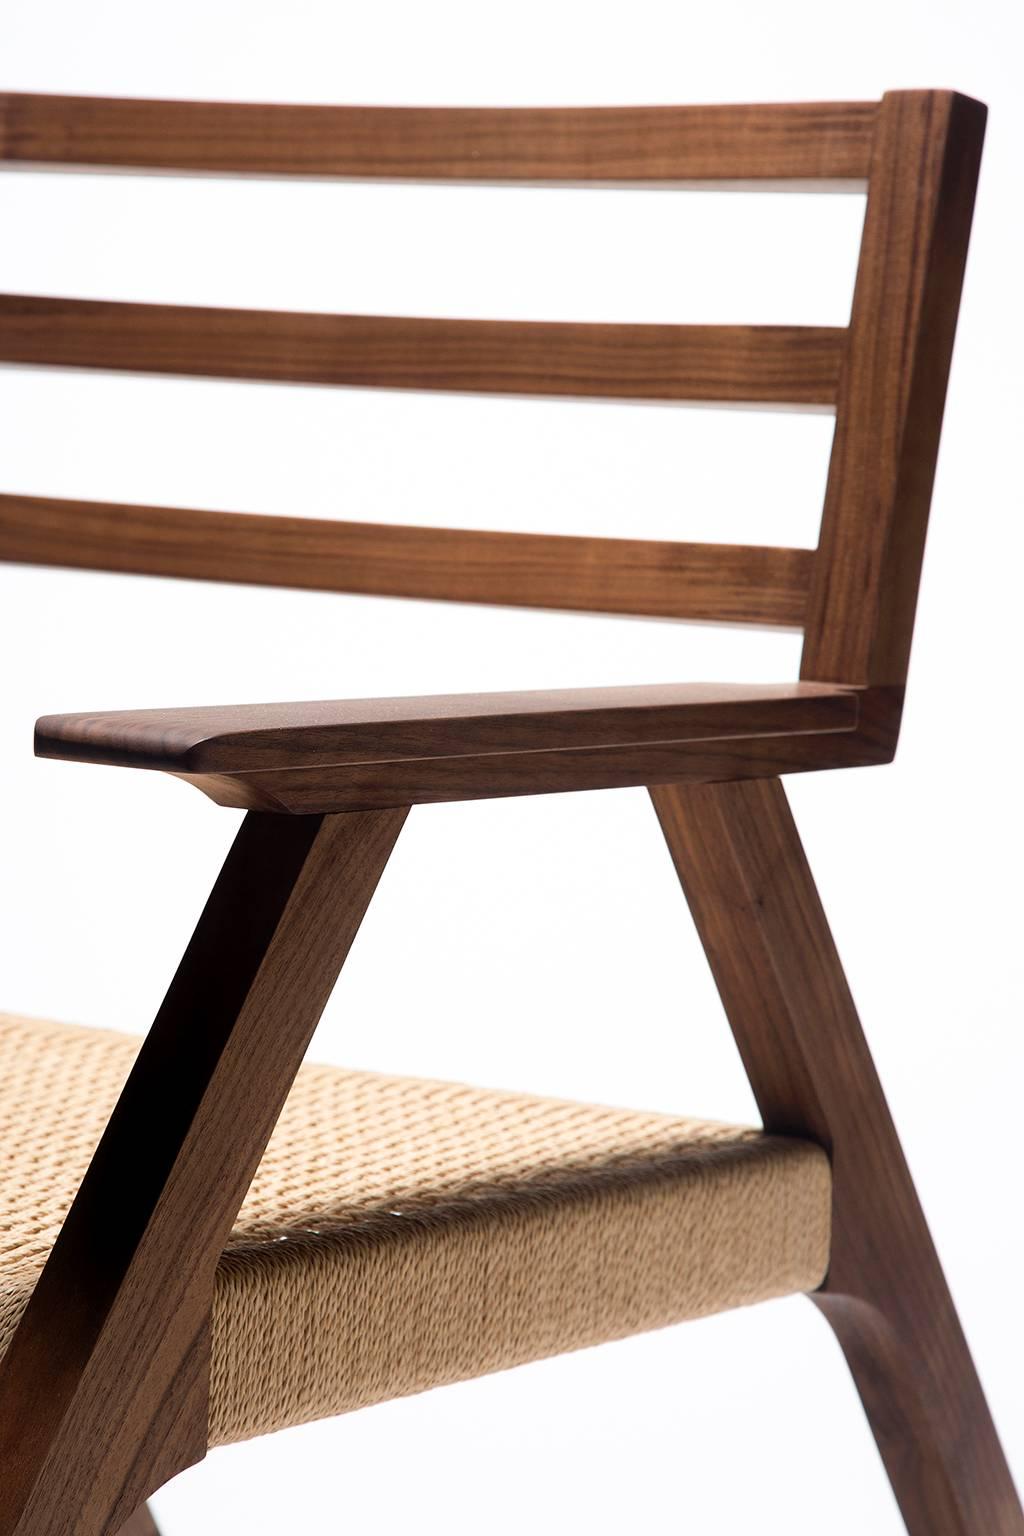 Our award-winning Giacomo rocking chair was the genesis for the Giacomo line of seating which now includes benches and chairs as well. Solid walnut construction and a handwoven danish cord seat. Also available in other species or finishes.